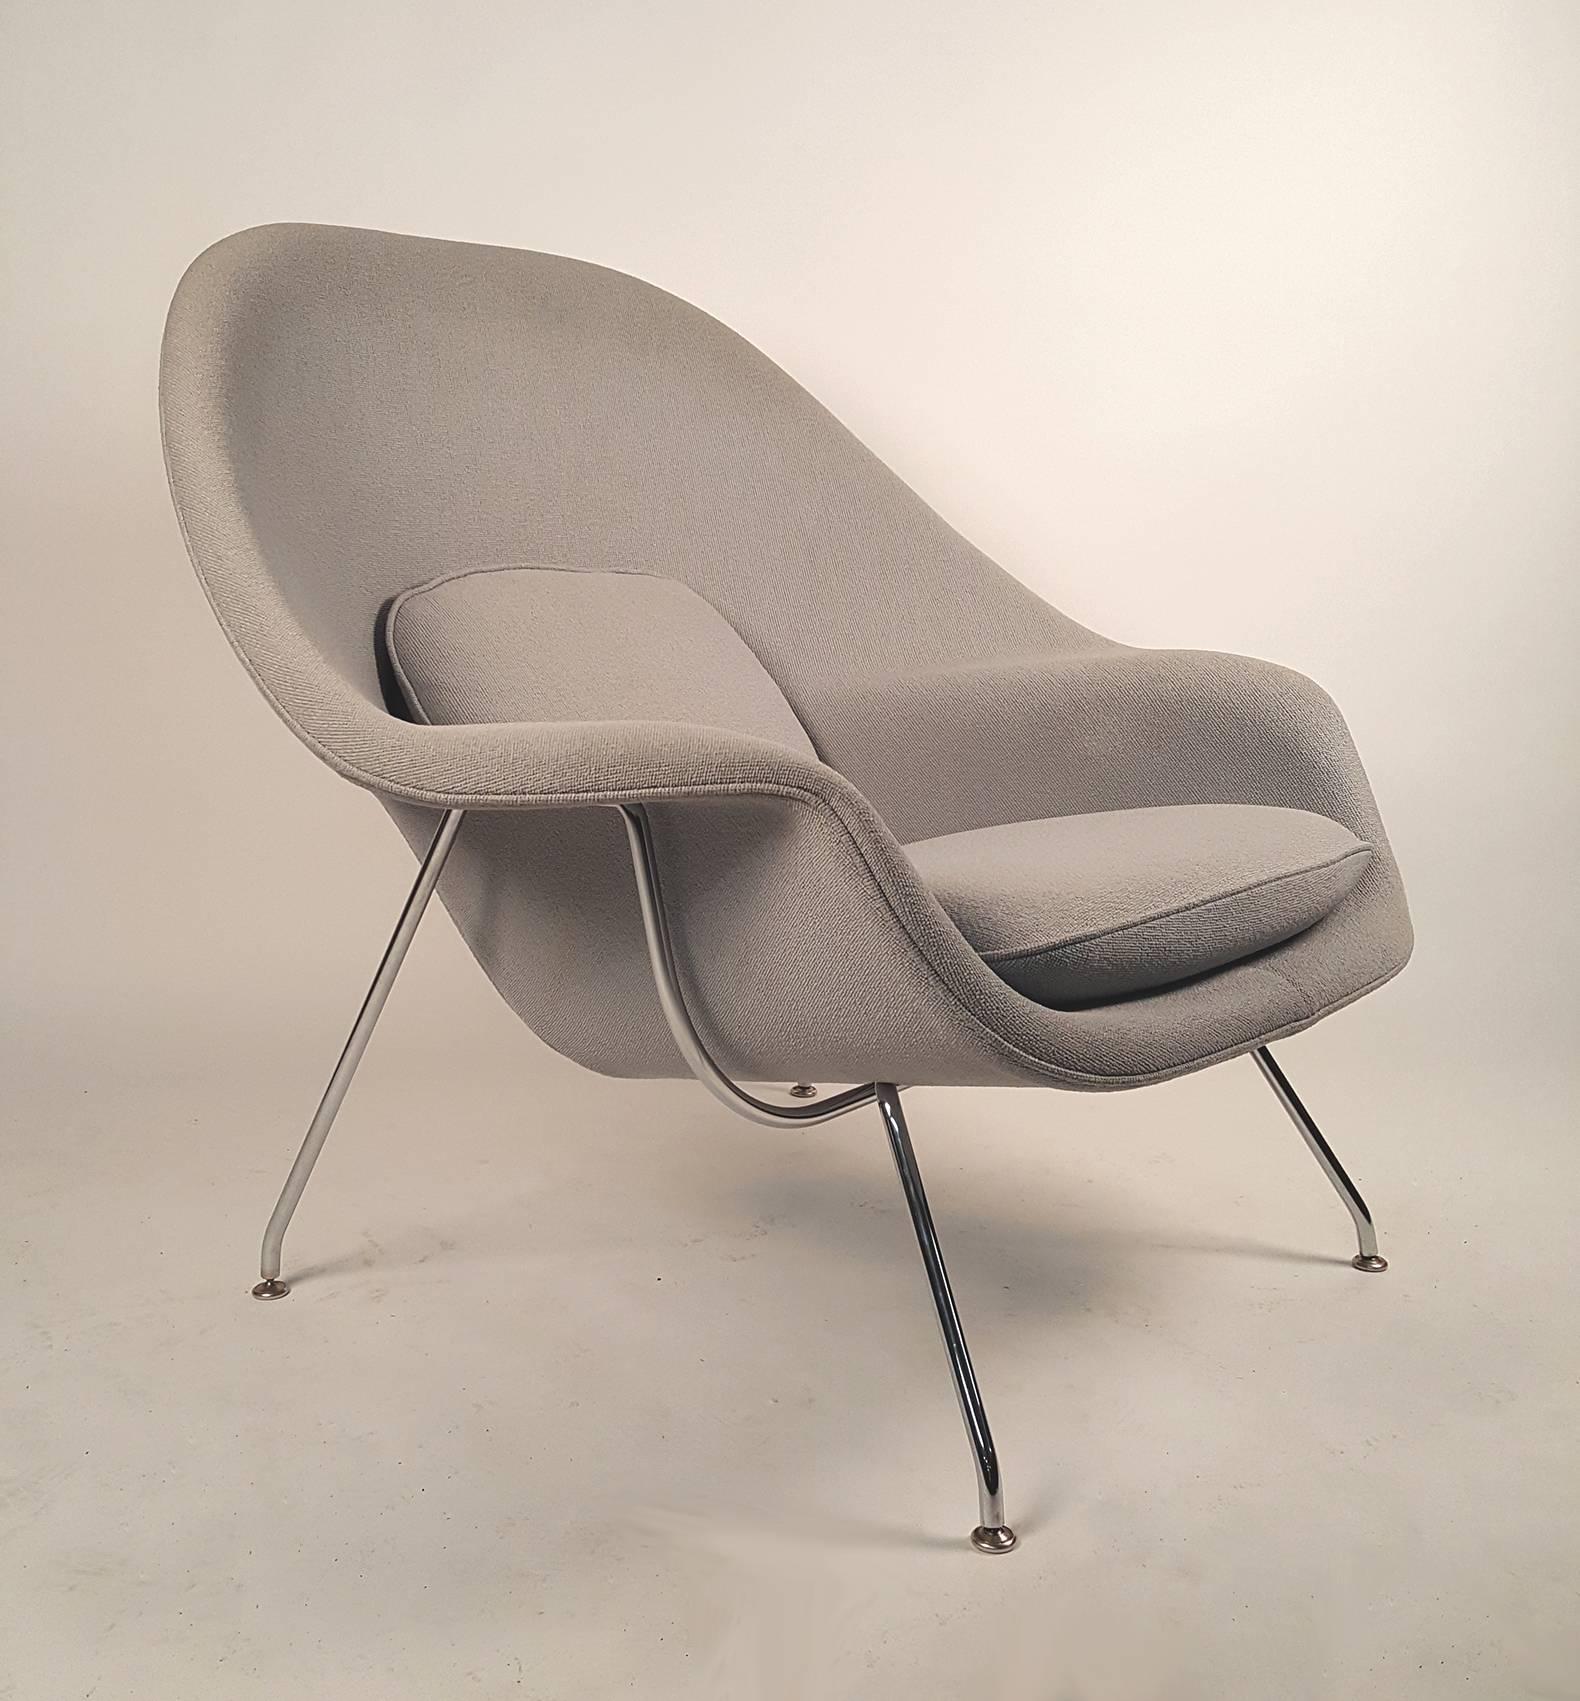 Womb chair designed by Eero Saarinen and produced by Knoll. Retains paper label to underside. Matching pair available.  $3400 each. Original upholstery.